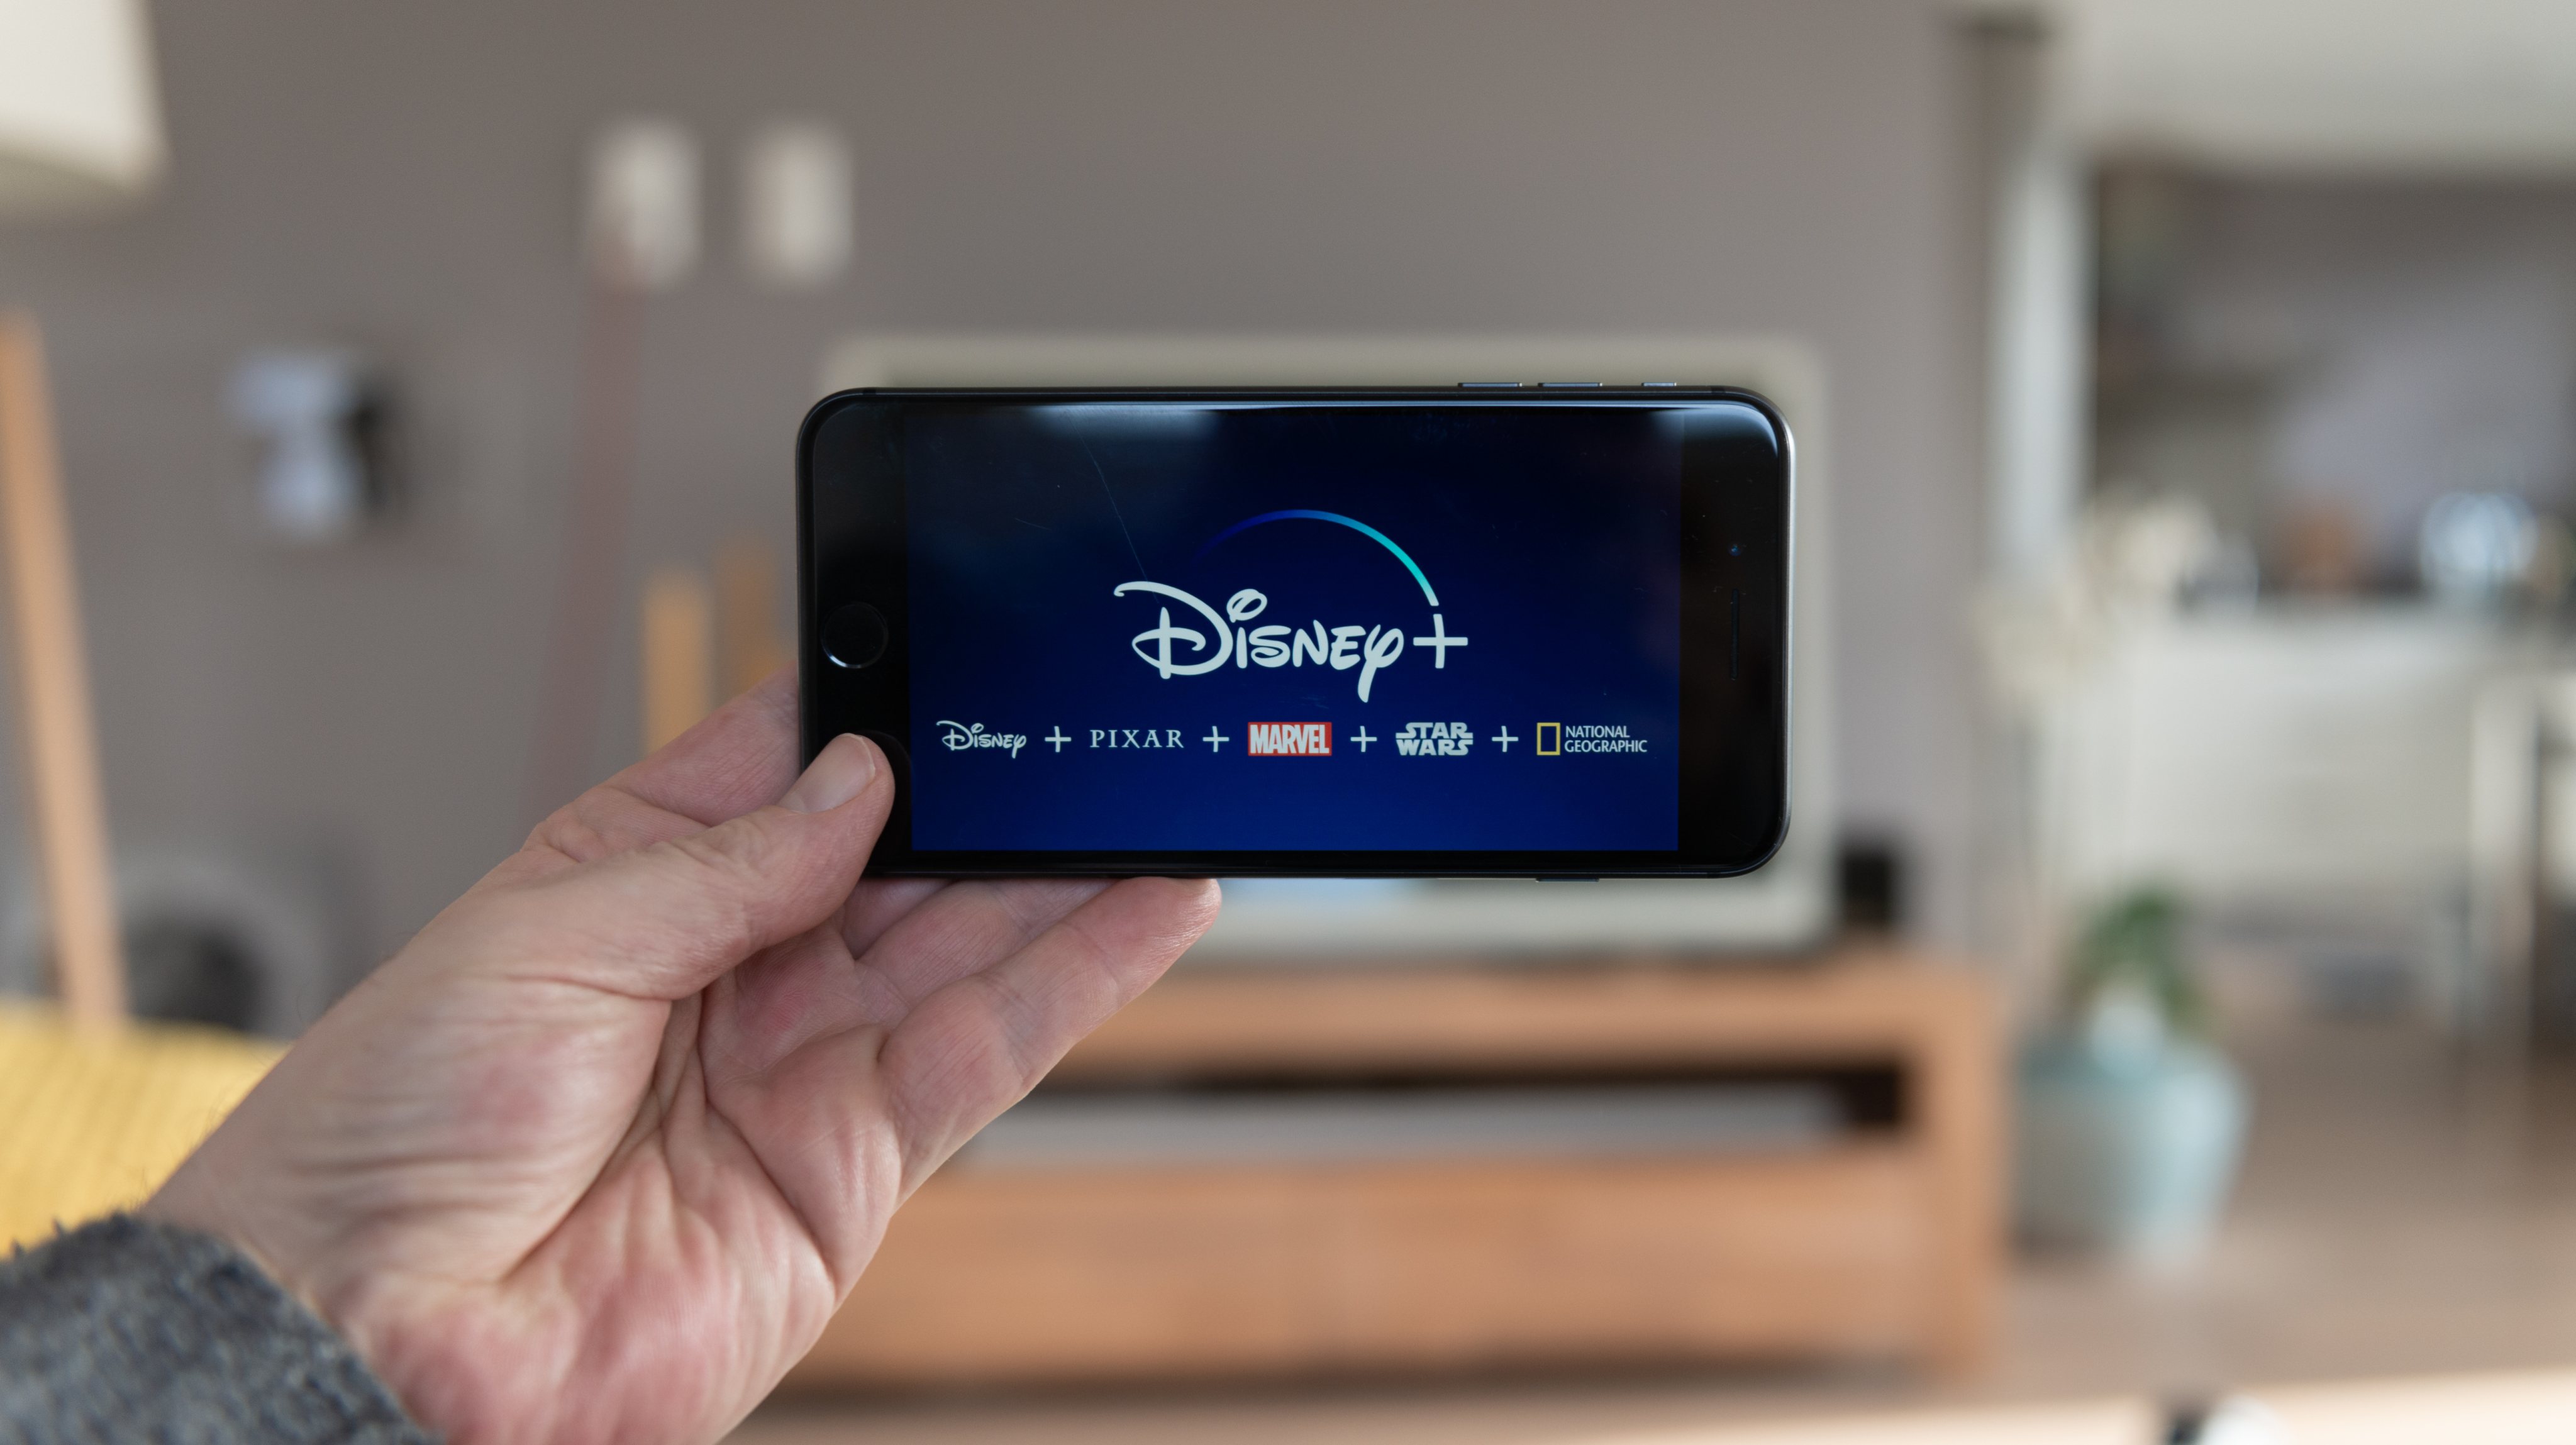 Disney+ startscreen on  mobile phone. Disney+ online video, content streaming subscription service. Man holds his smartphone up and looks at disney plus